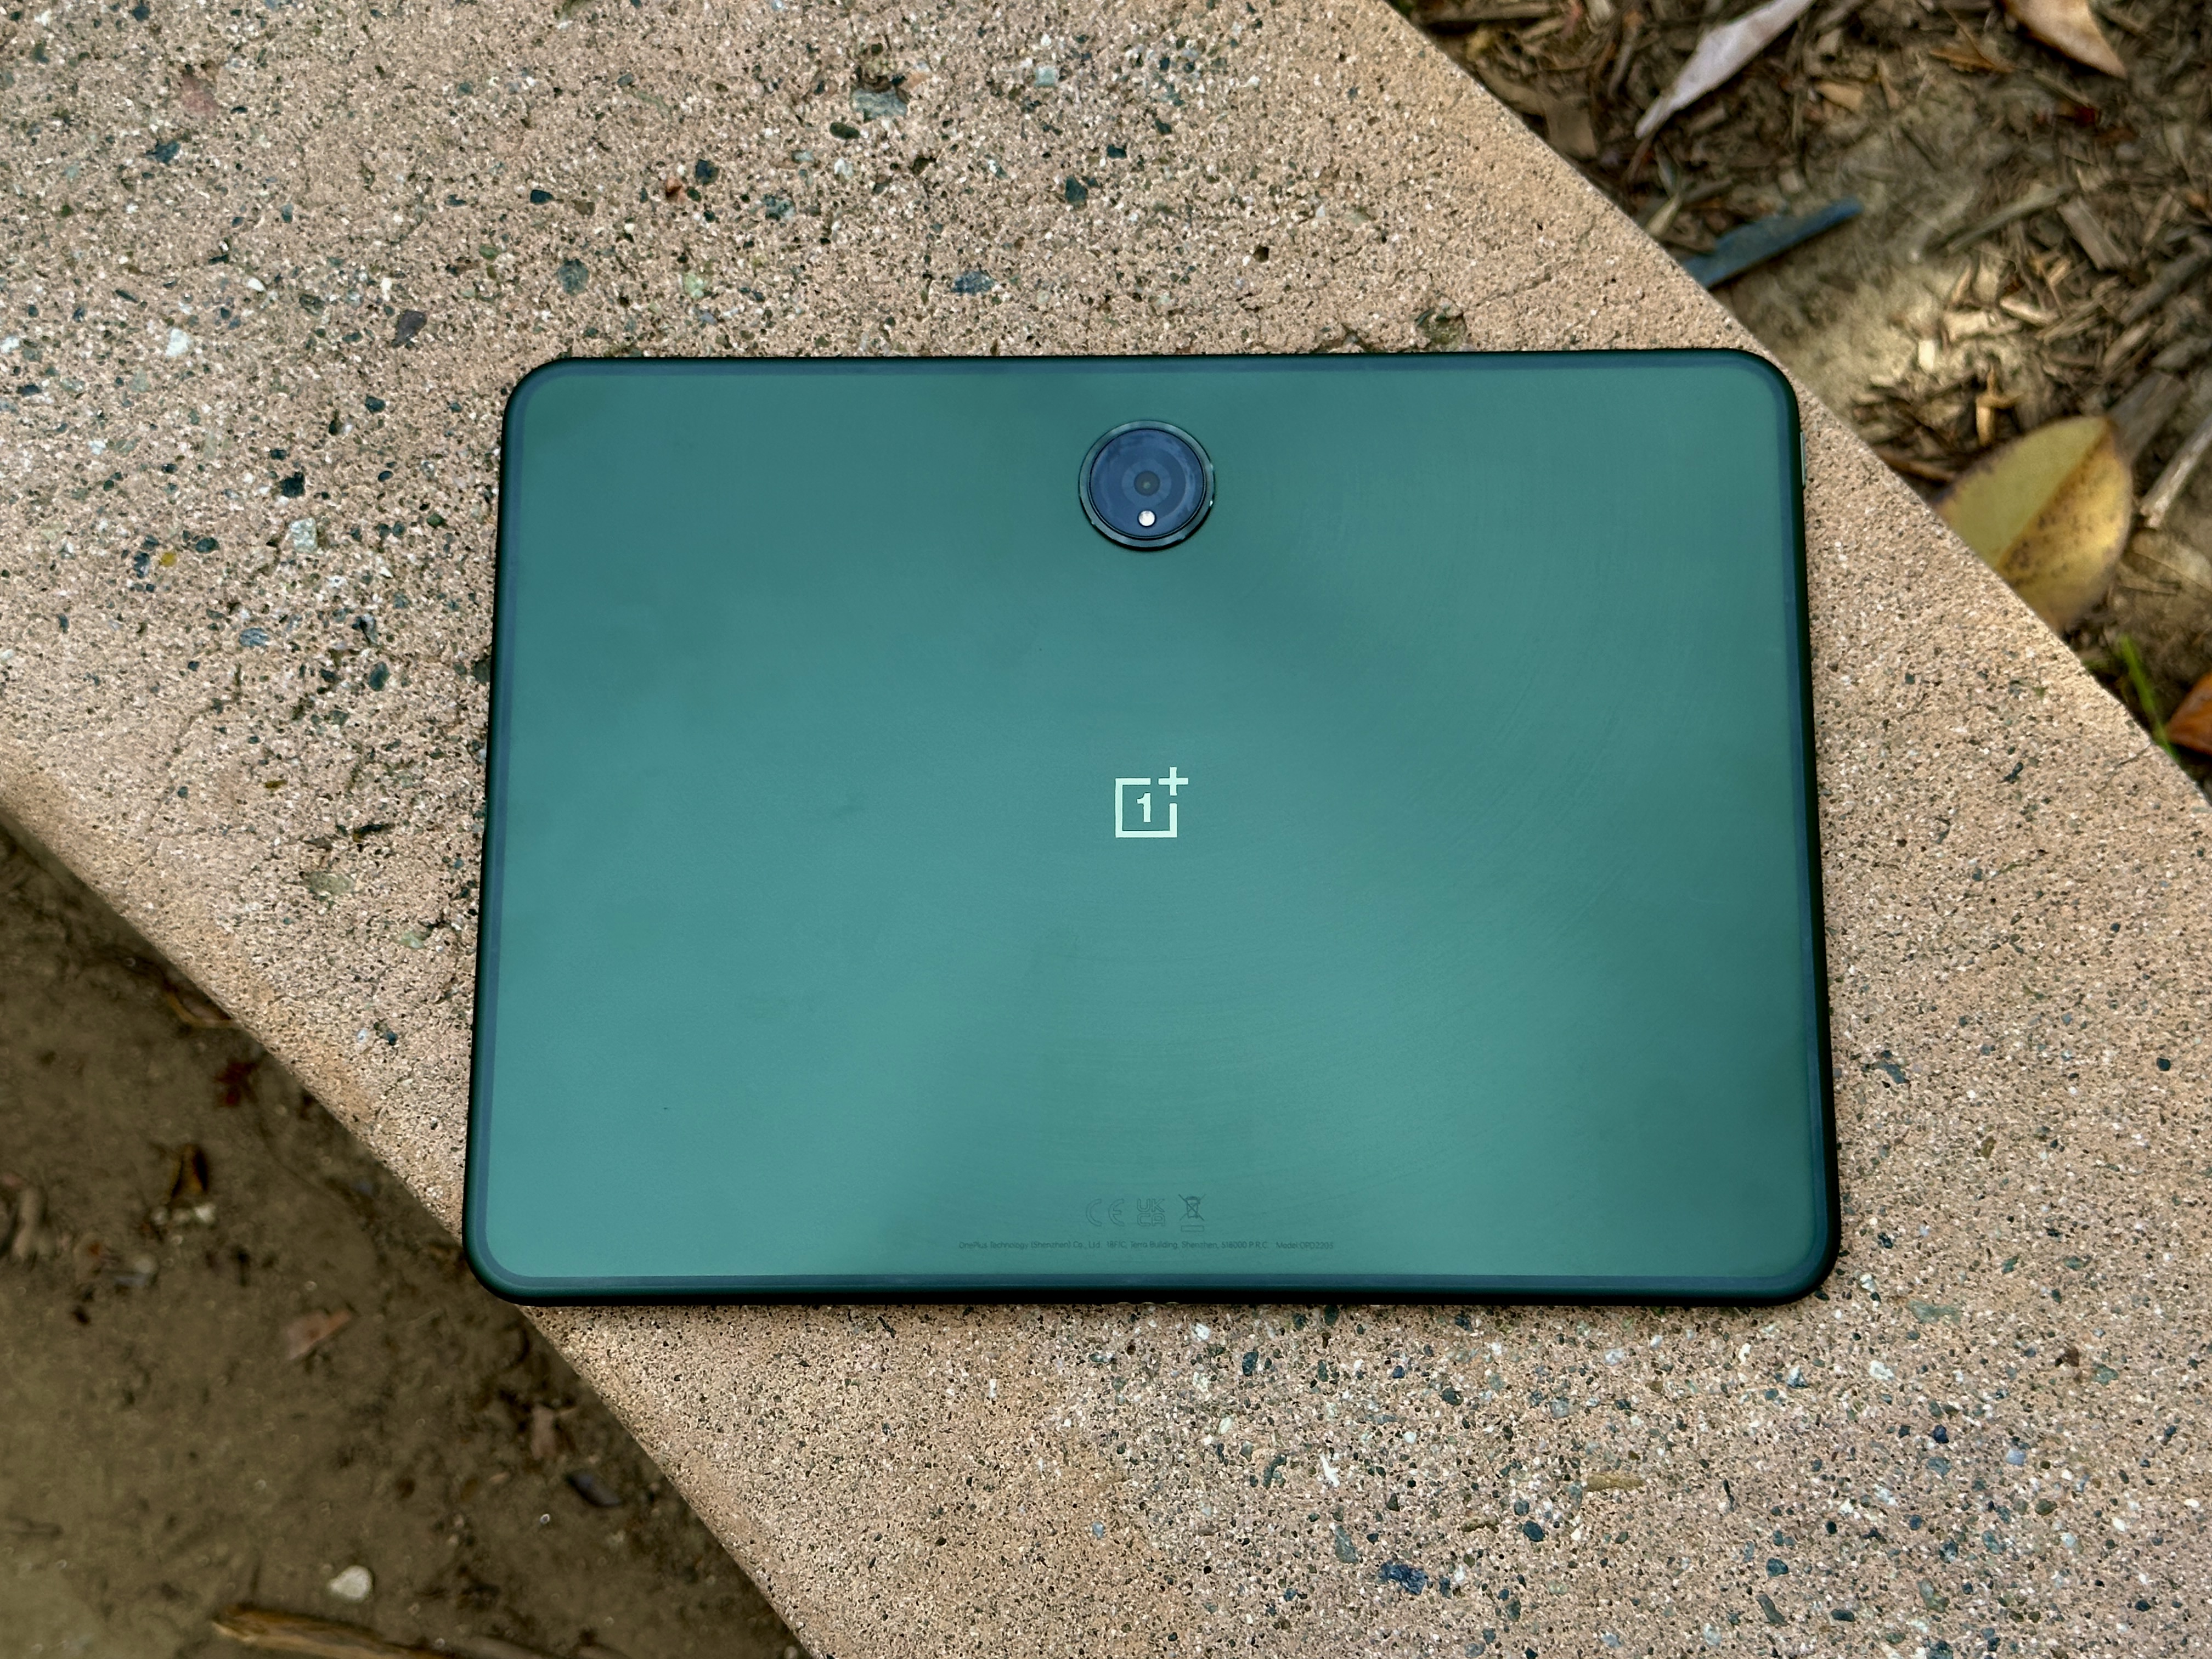 OnePlus Pad Go is all about refined versatility, rare in budget